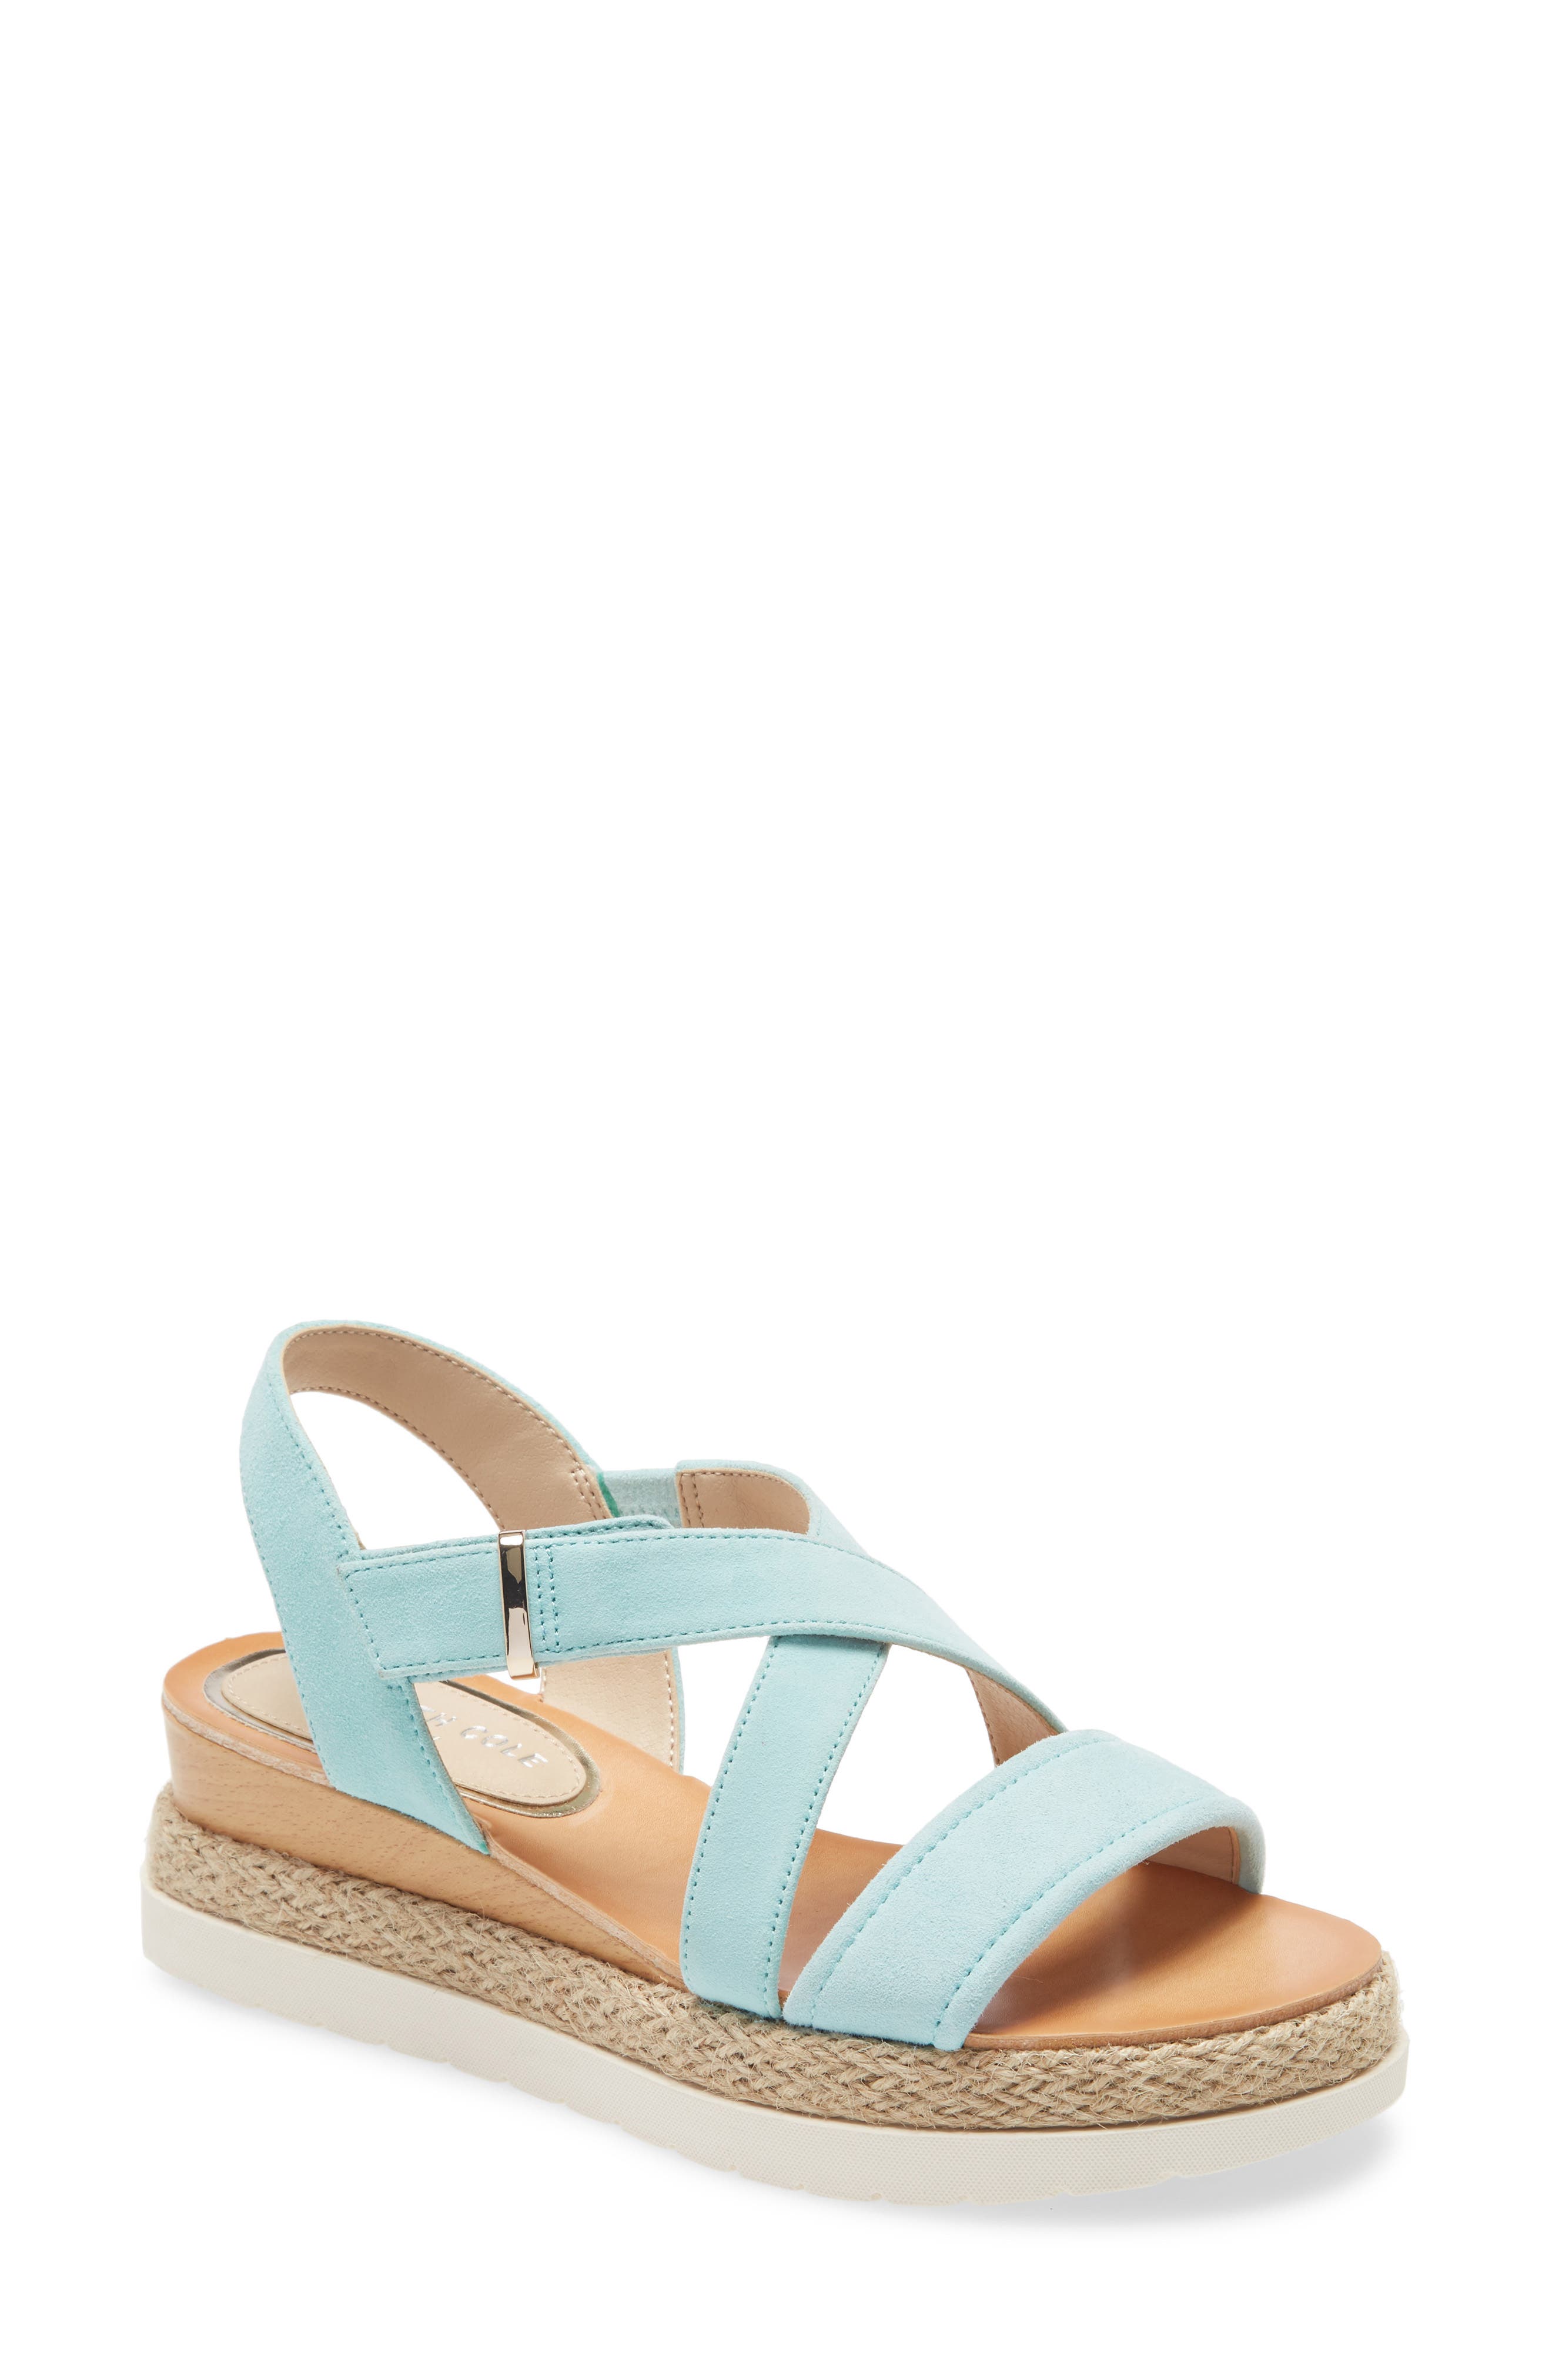 Women's Kenneth Cole New York Sandals 